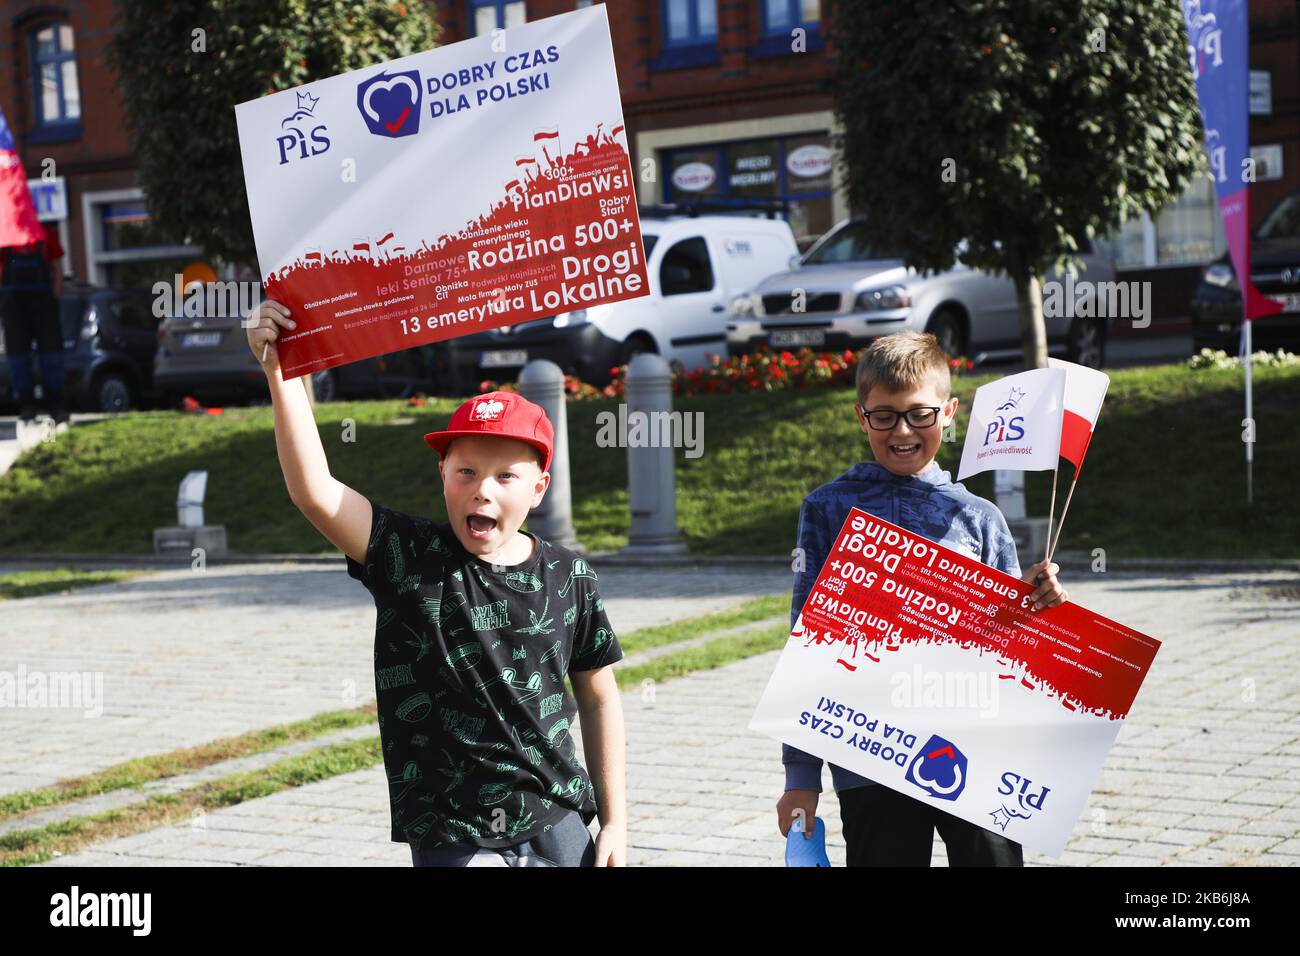 Children hold banners supporting Law and Justice (PiS) ruling partwhile waiting for the official visit of Mateusz Morawiecki, Prime Minister of Poland, in Ruda Slaska during his campaign in Silesia region of Poland on 21 September, 2019. Ahead of next month's elections, Morawiecki presented the ruling Law and Justice (PiS) party’s proposals for small and midsized business owners. (Photo by Beata Zawrzel/NurPhoto) Stock Photo